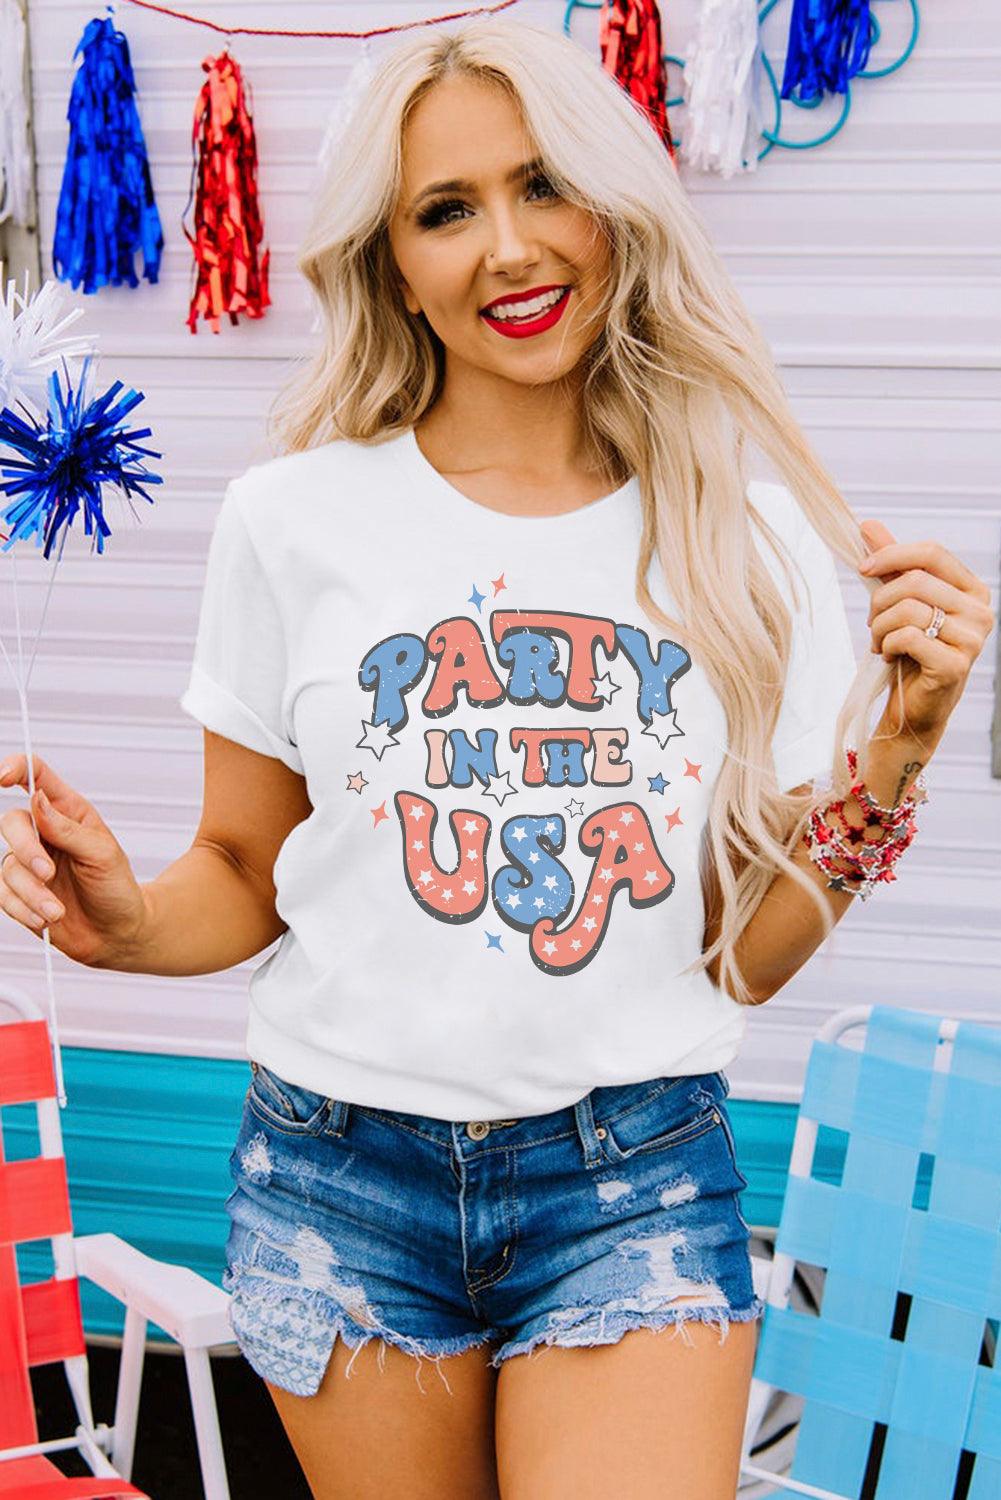 White PARTY IN THE USA Flag Fashion Graphic Tee